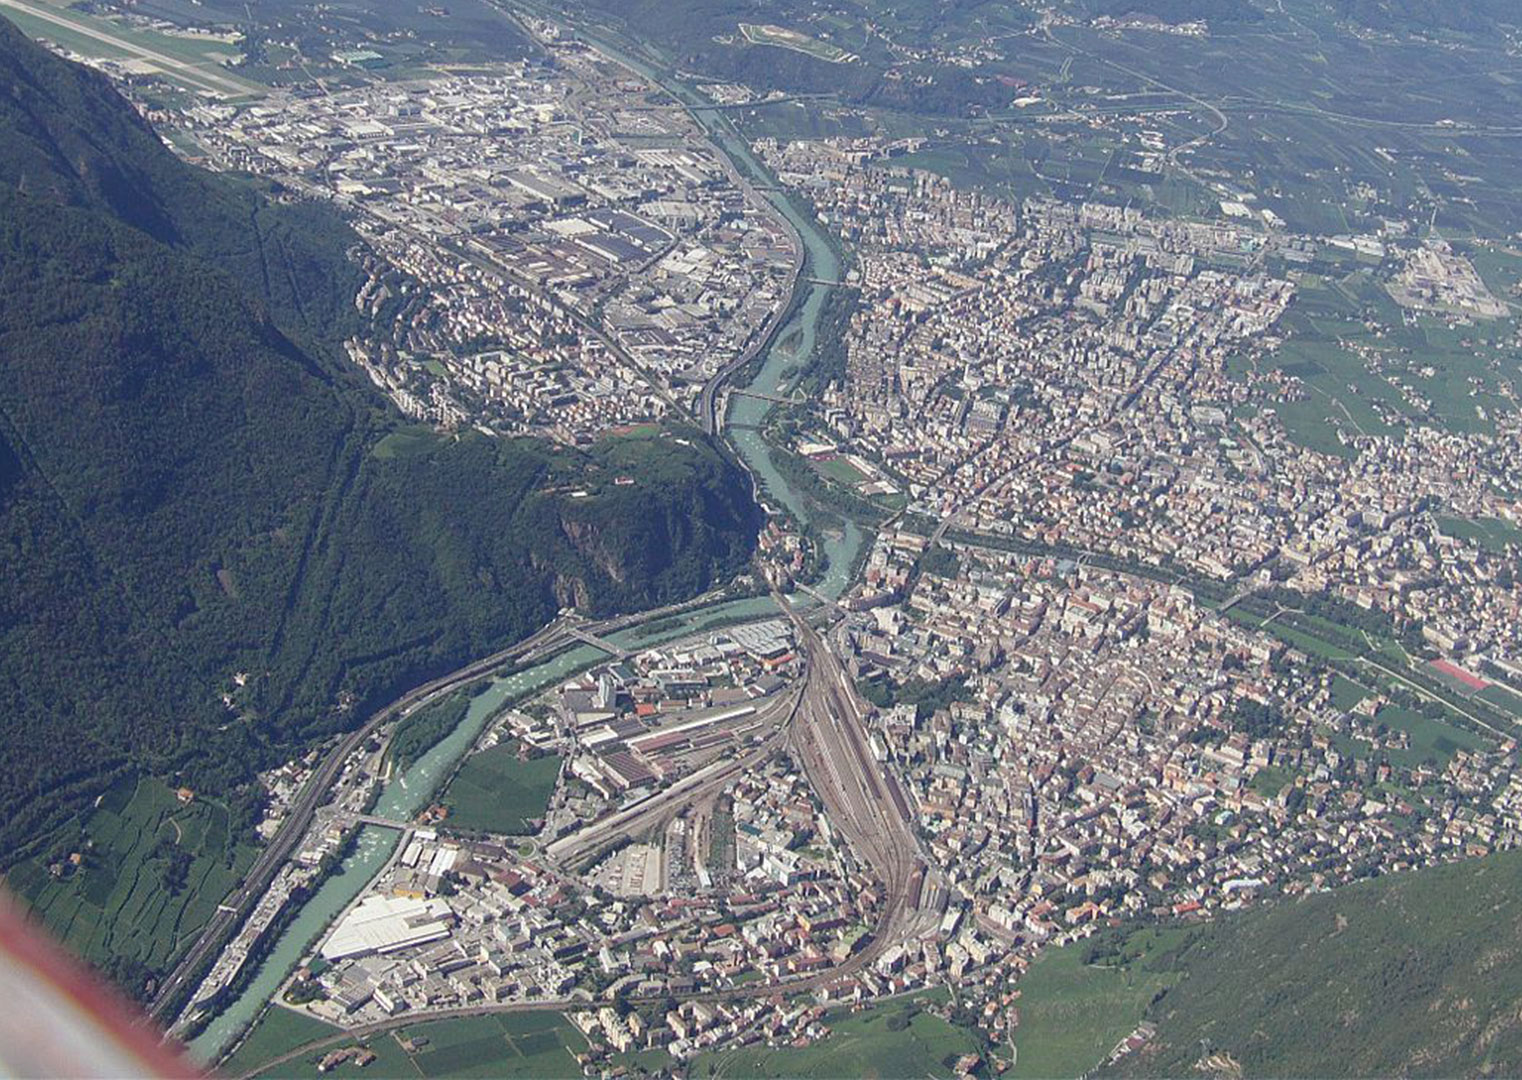 Picture of Bolzano from airplane 2011 https://it.wikivoyage.org/wiki/Bolzano